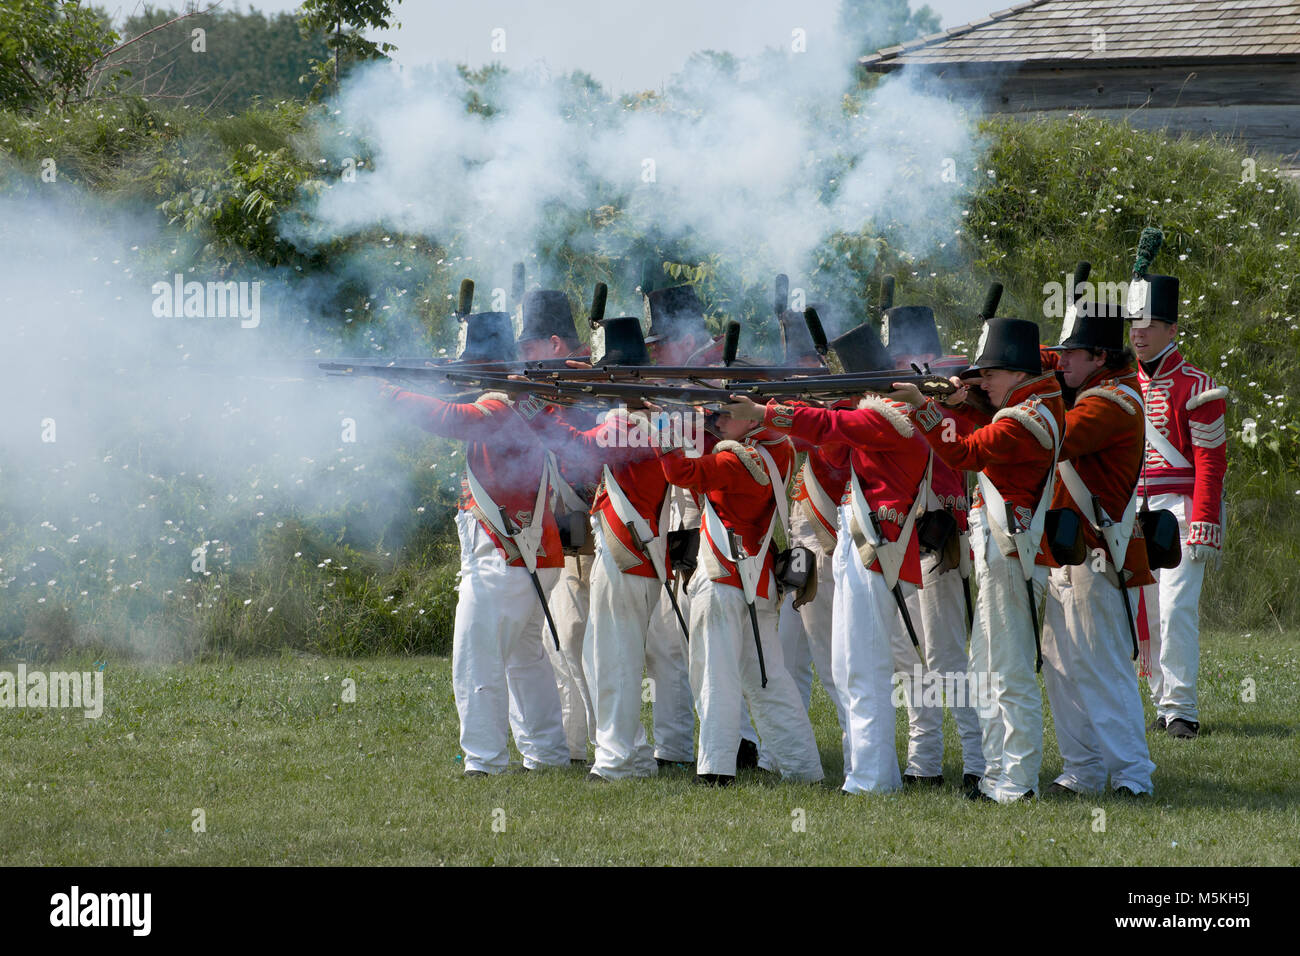 A musket firing demonstration at the Fort George Historic Site, Niagara-on-the-Lake, Ontario, Canada Stock Photo